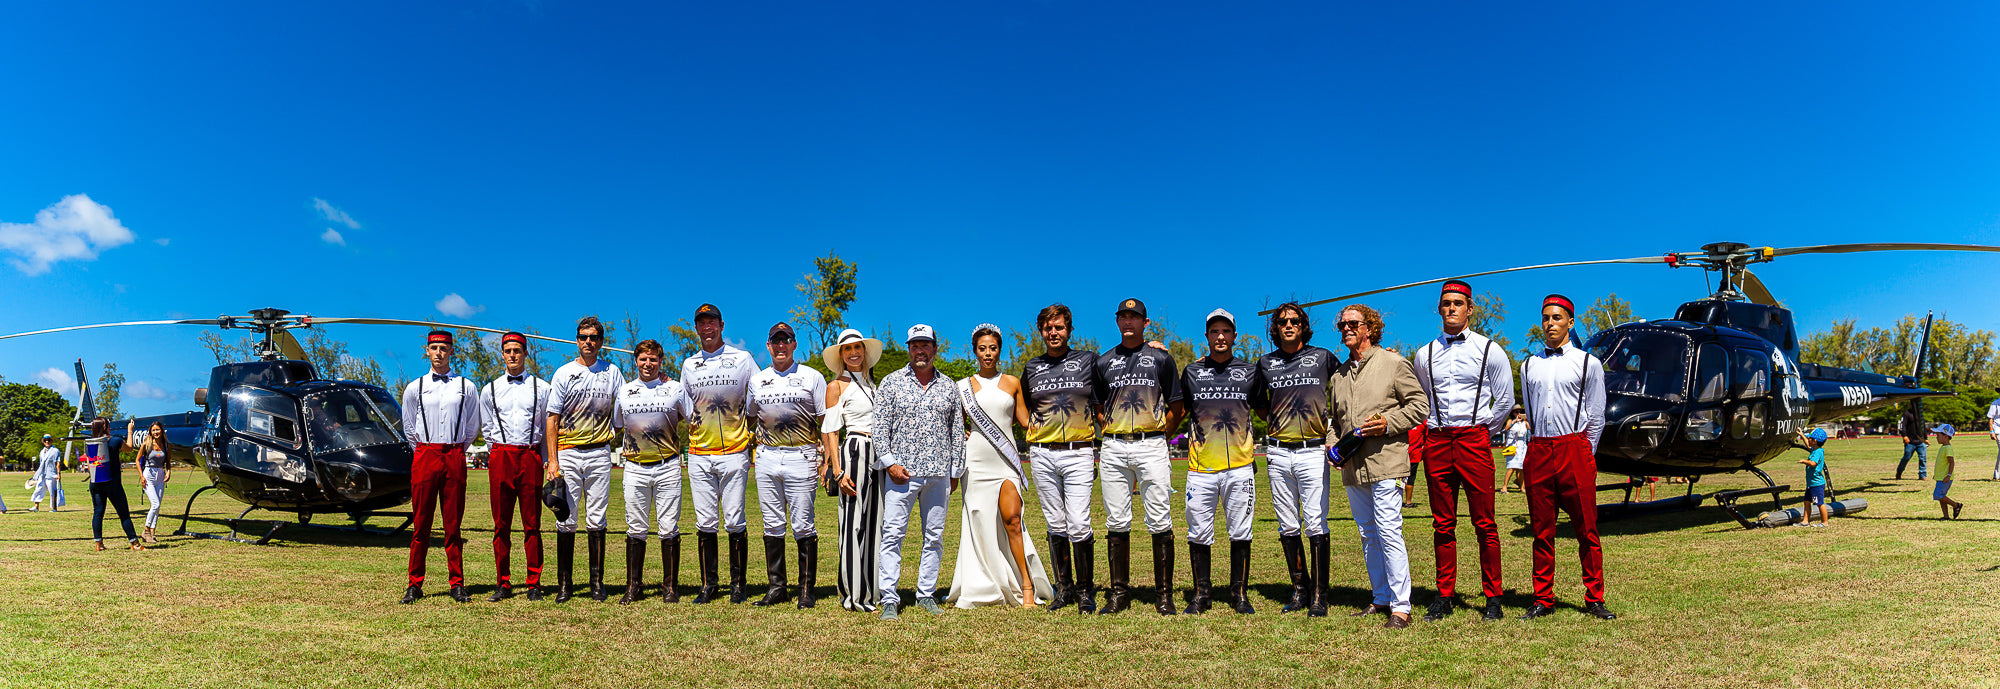 Hawaii Polo Life Spring Invitational 2018 Helicopter Shot